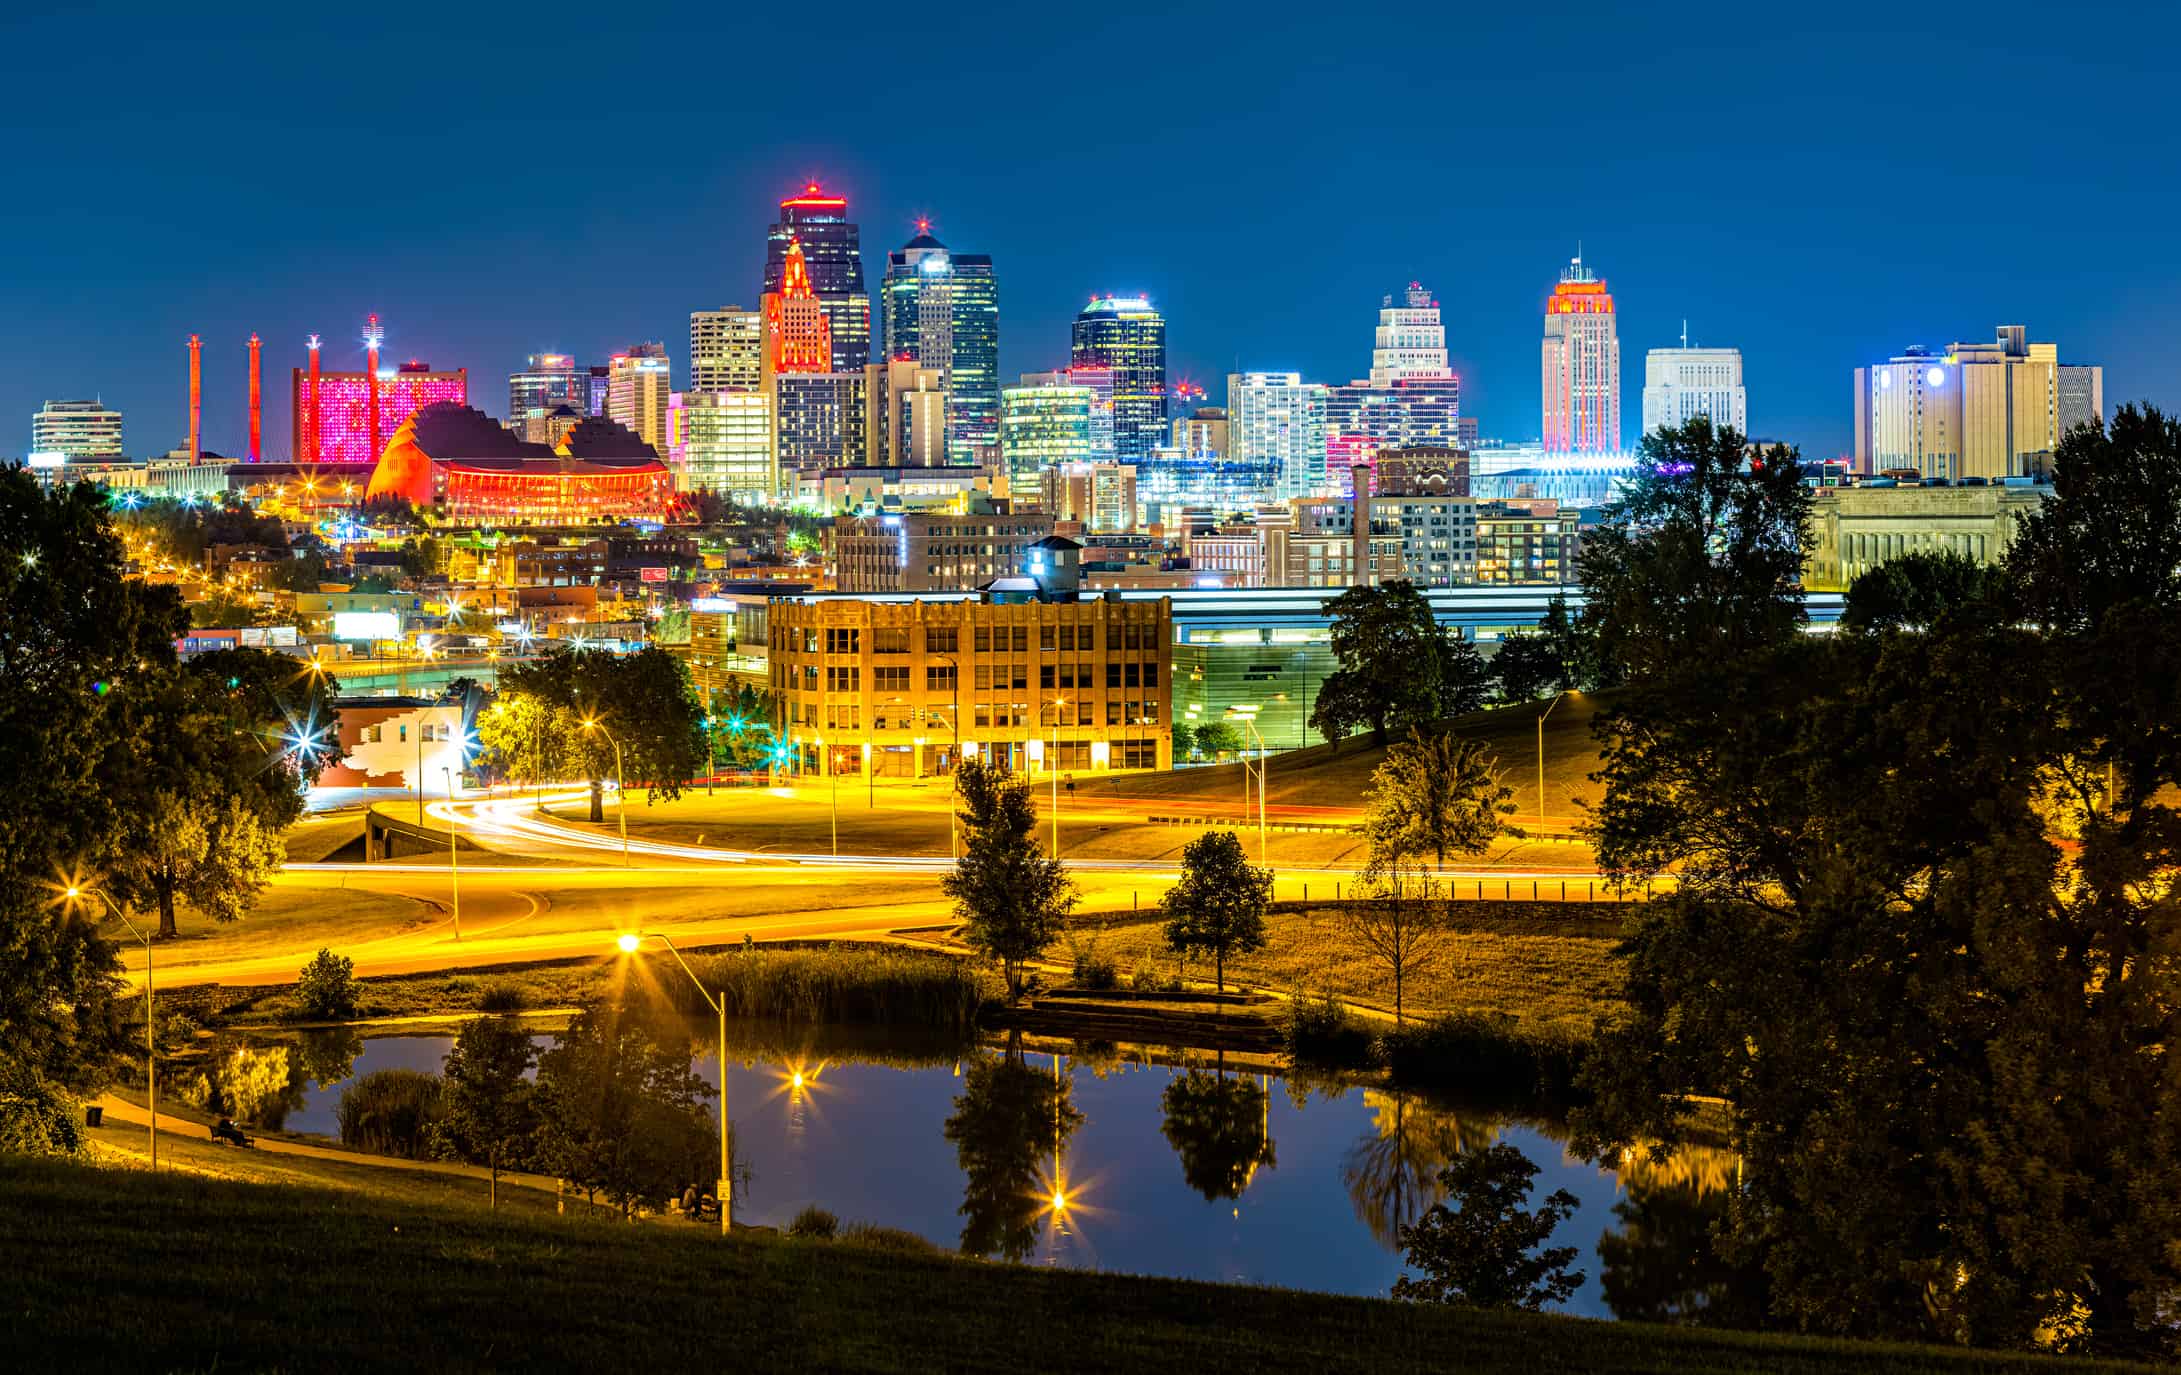 Kansas City skyline by night, viewed from Penn Valley Park. Kansas City is the largest city in Missouri.